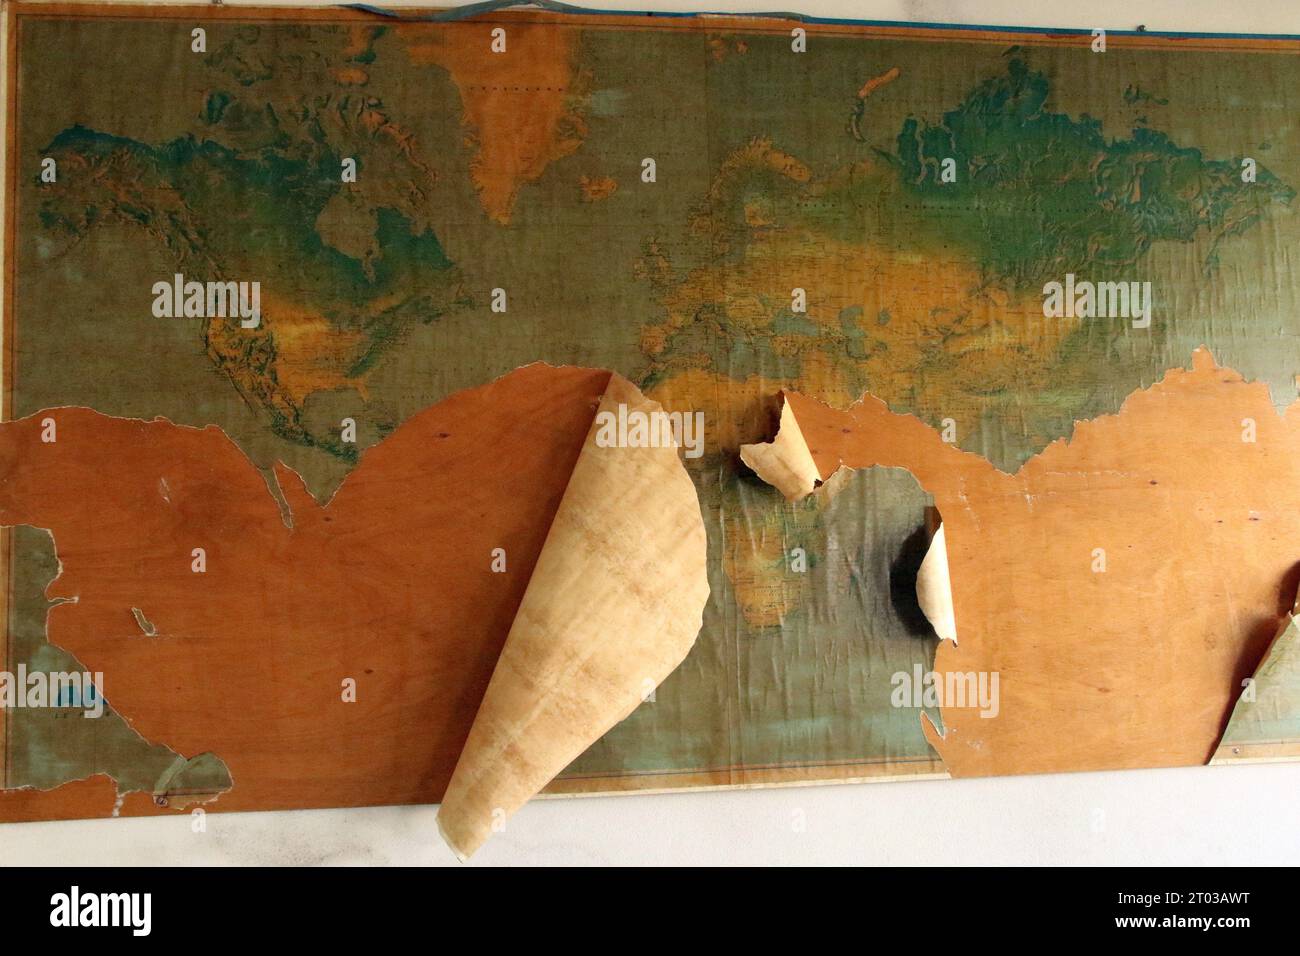 A stack of white paper cones rests on top of a cork bulletin board adorned with a vibrant world map illustration Stock Photo